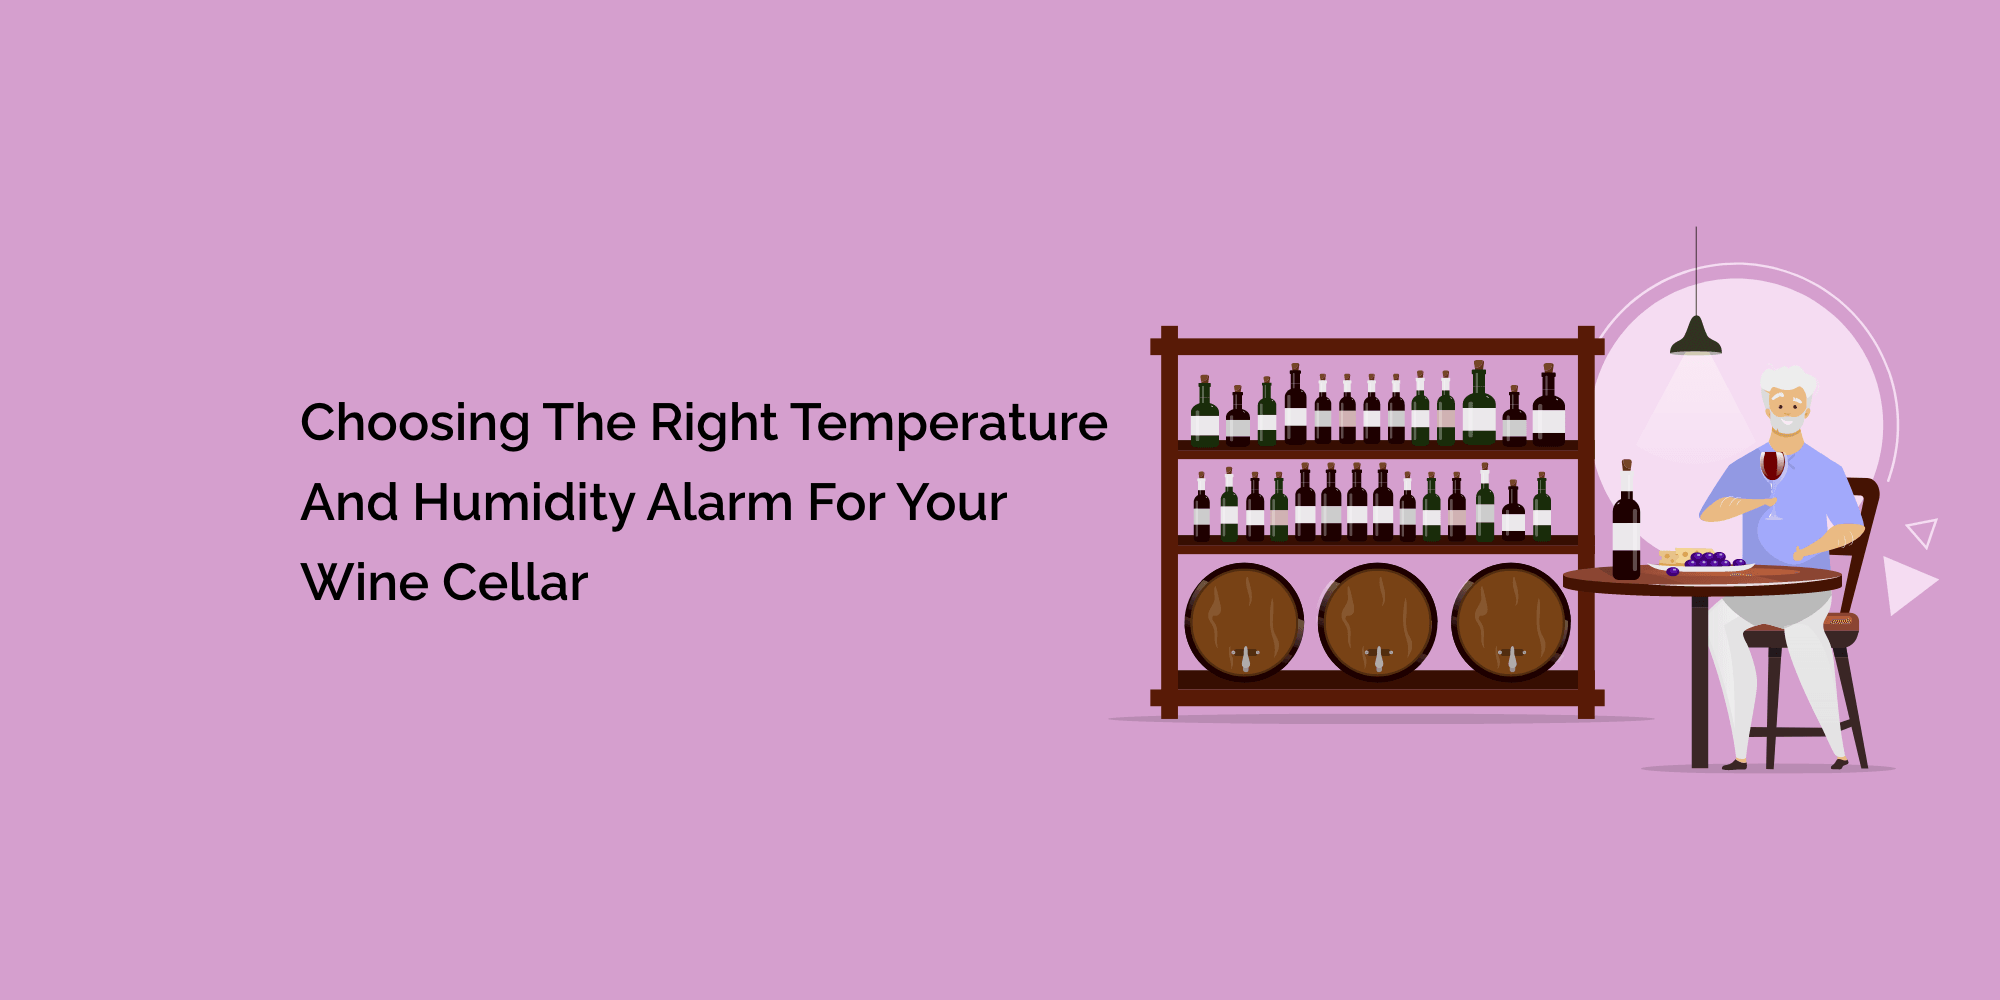 Choosing the Right Temperature and Humidity Alarm for Your Wine Cellar